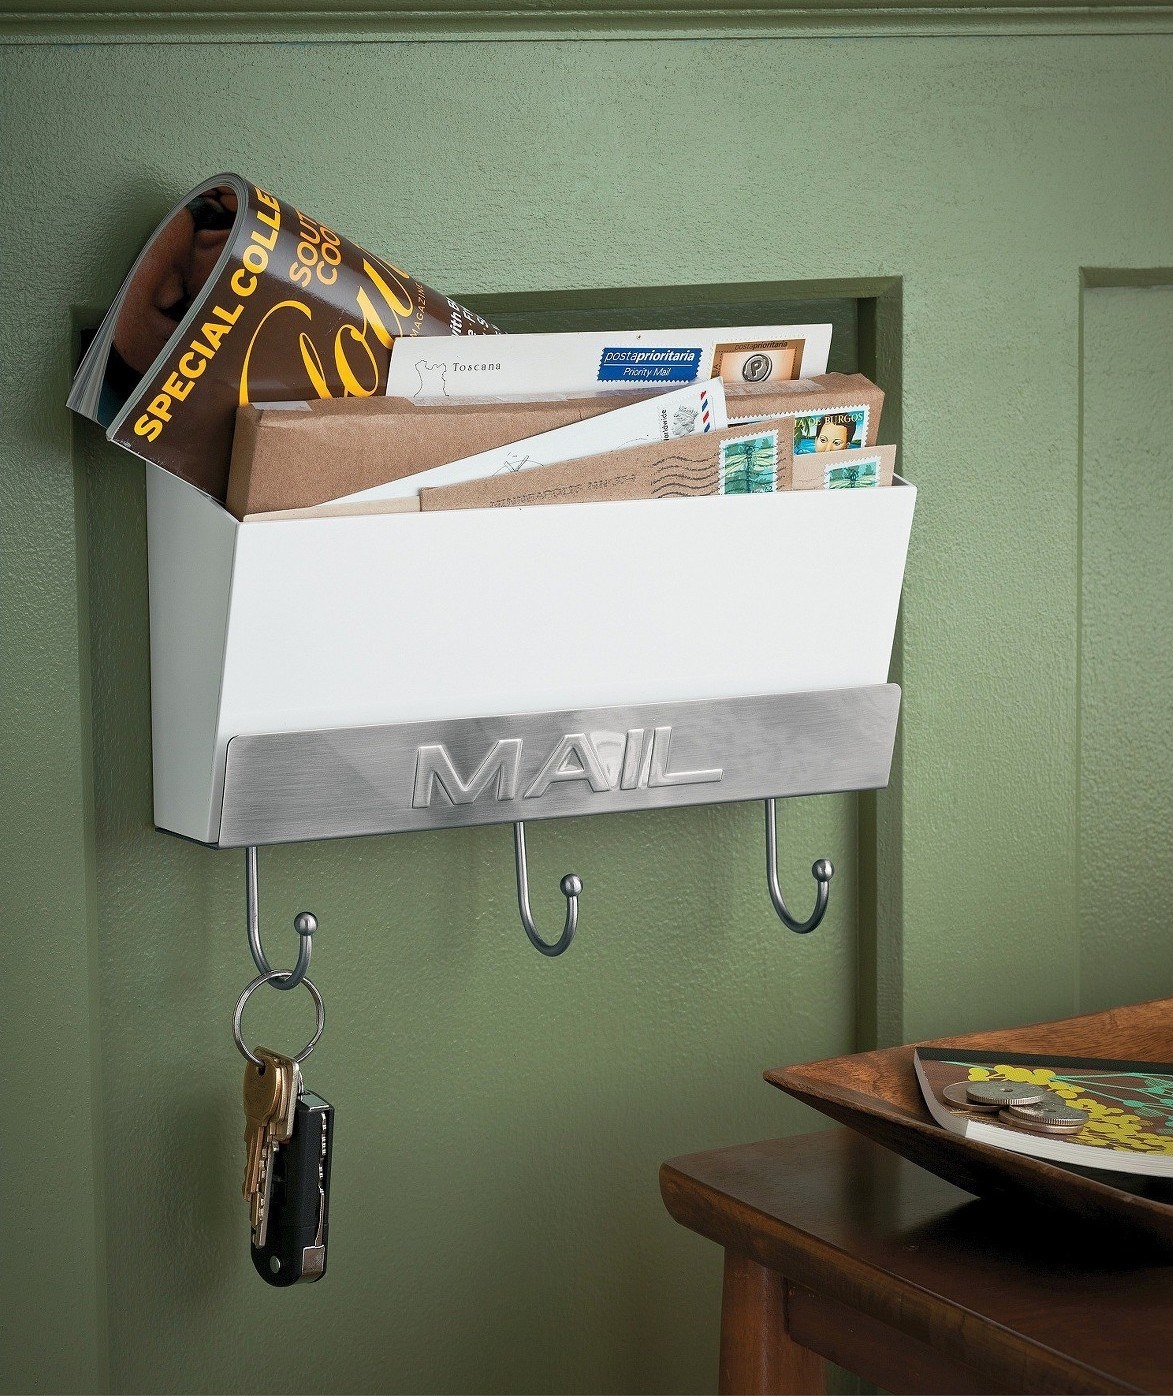 The mail holder hangs on a green wall with letters and keys